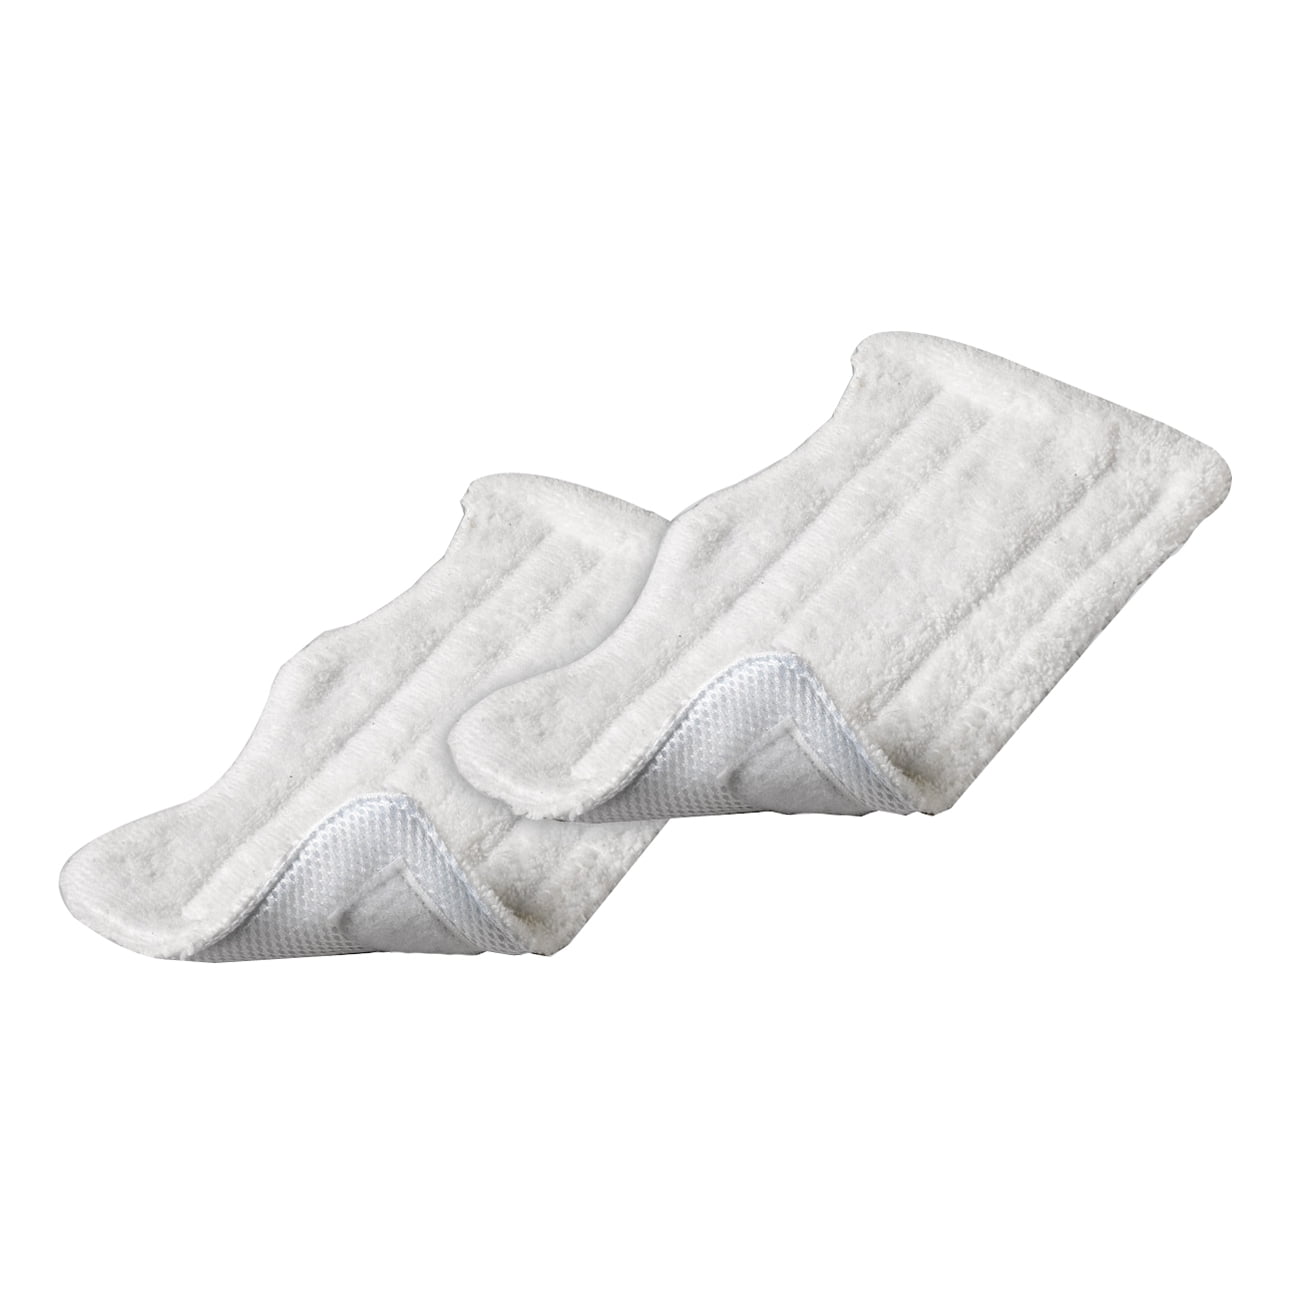 Steam Mop Pads for Euro Pro Shark Microfiber Pad Replacement 8,4 or 1 Clean Co 